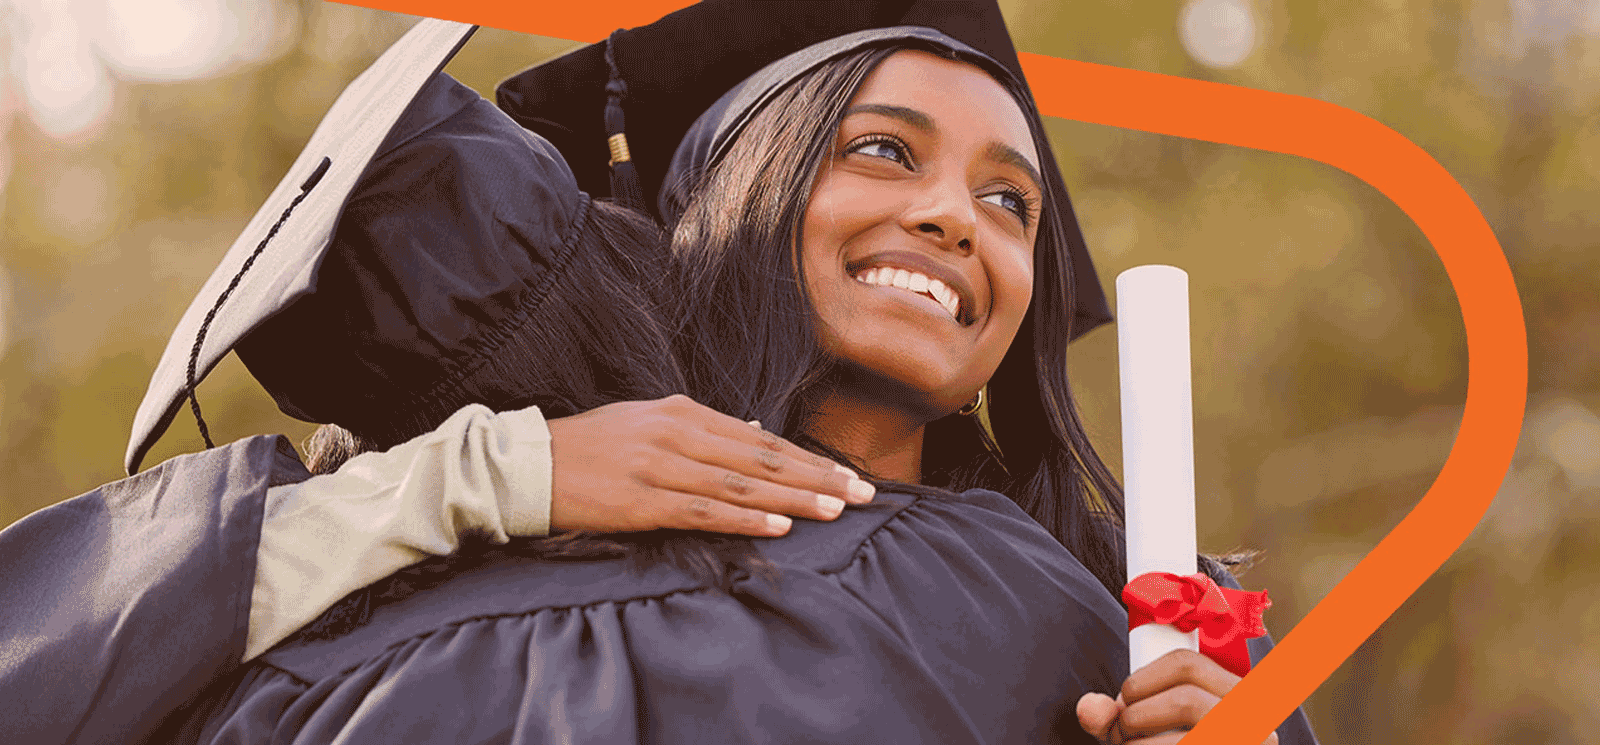 Smiling Female wearing a cap and gown and hugging another person.